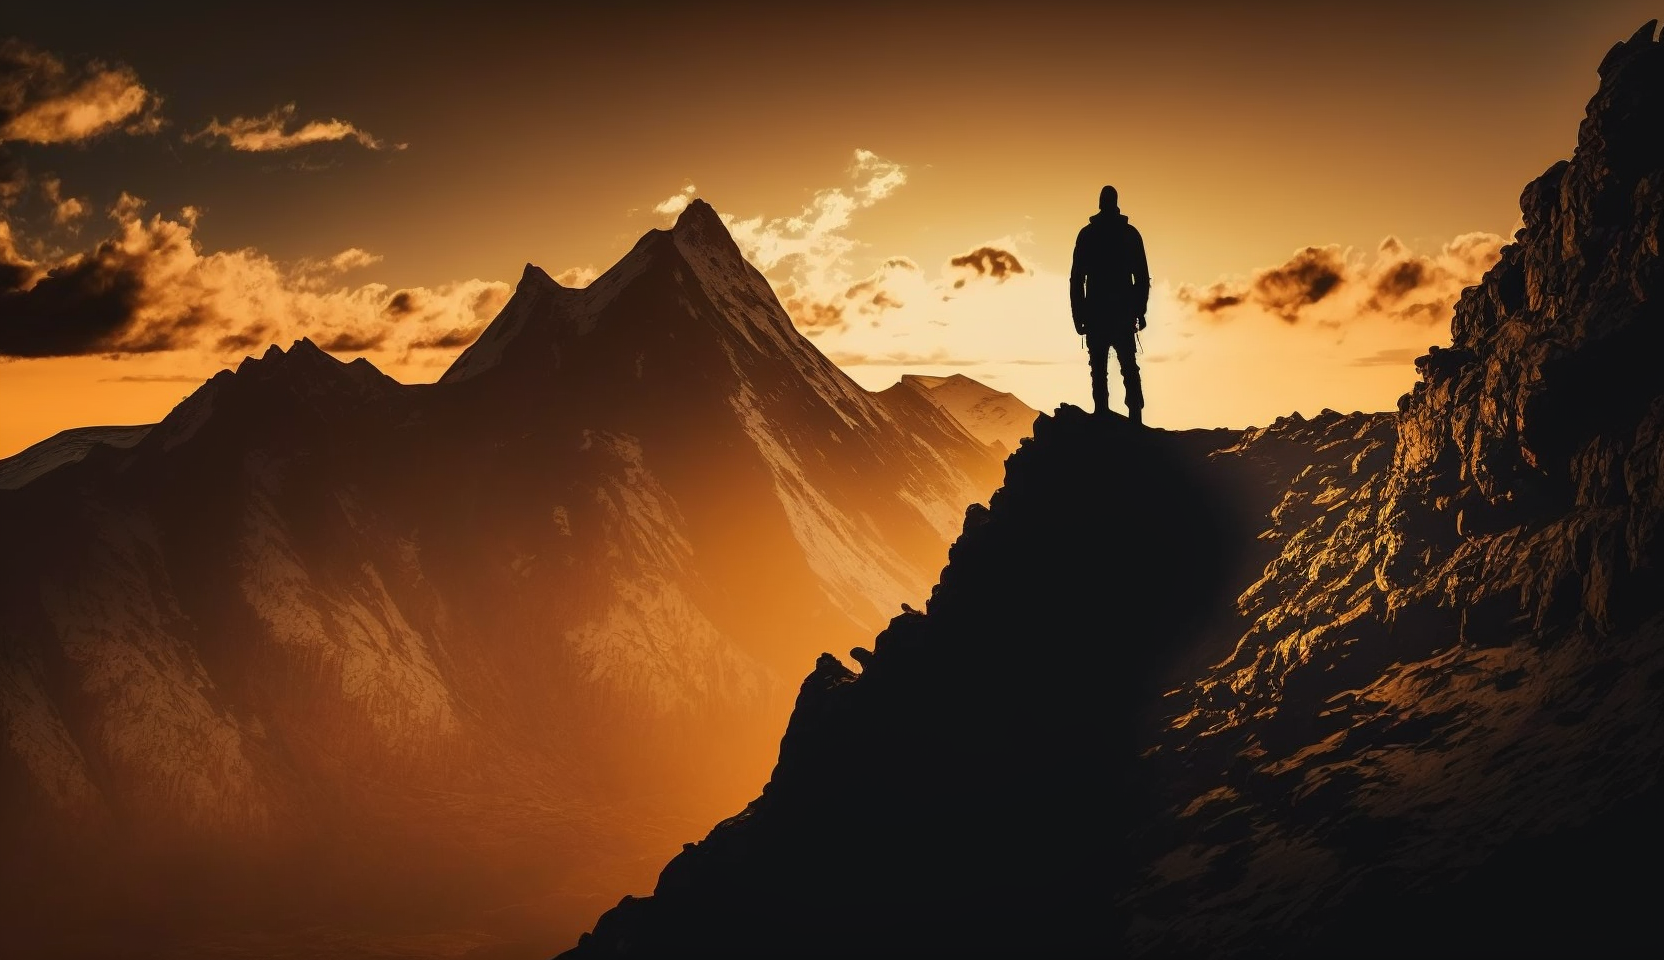 A silhouette of a person stood on a mountain at sunset